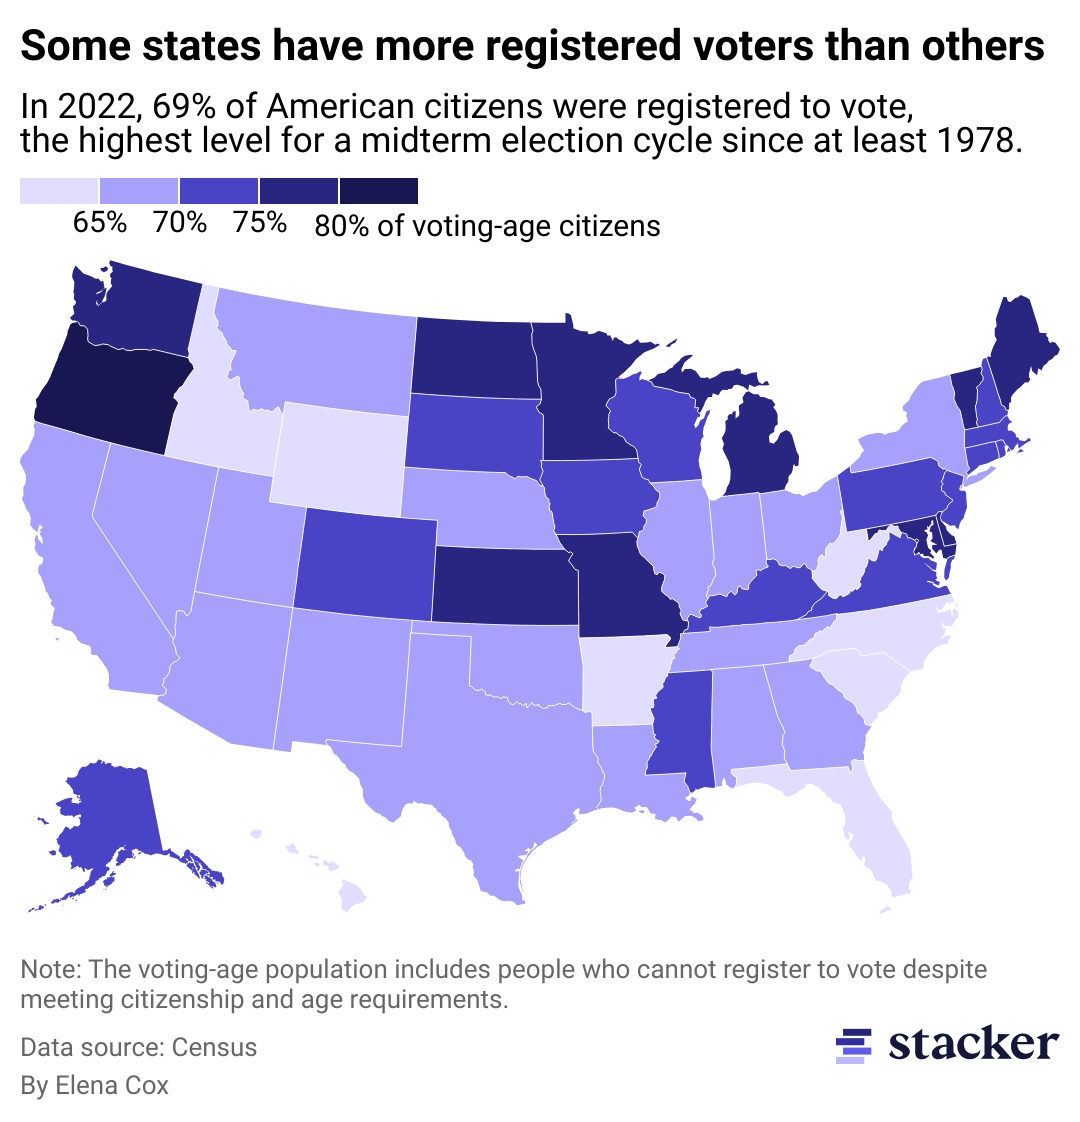 A map showing which states have the largest share of registered voters.